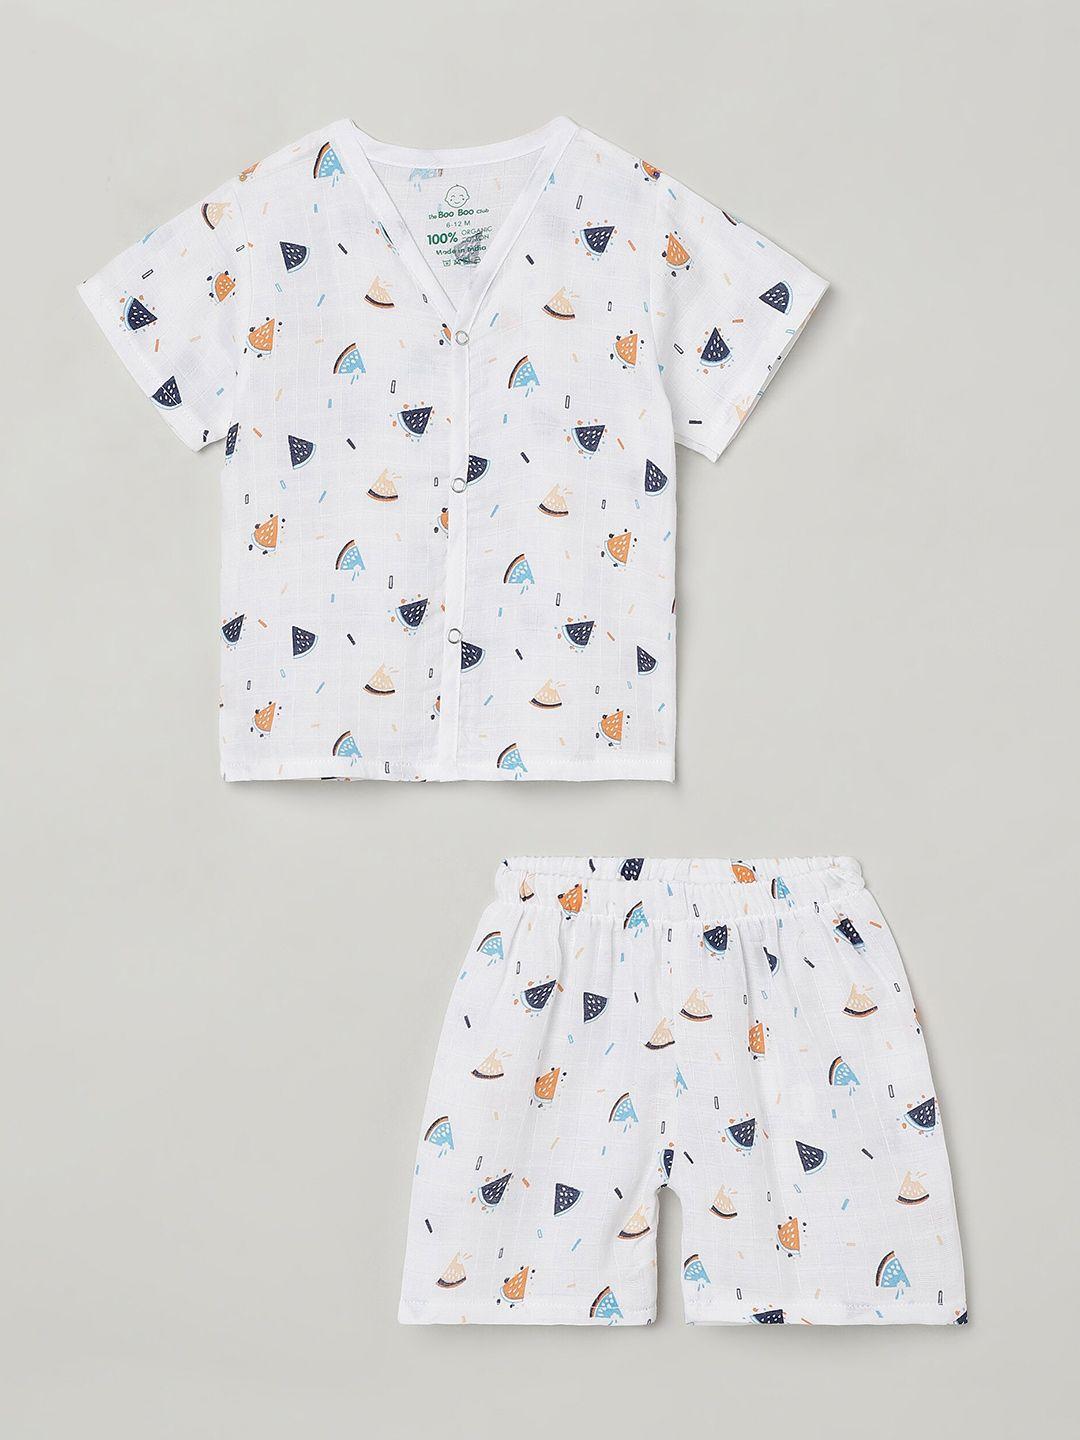 the-boo-boo-club-infants-kids-printed-pure-cotton-sustainable-shirt-with-shorts